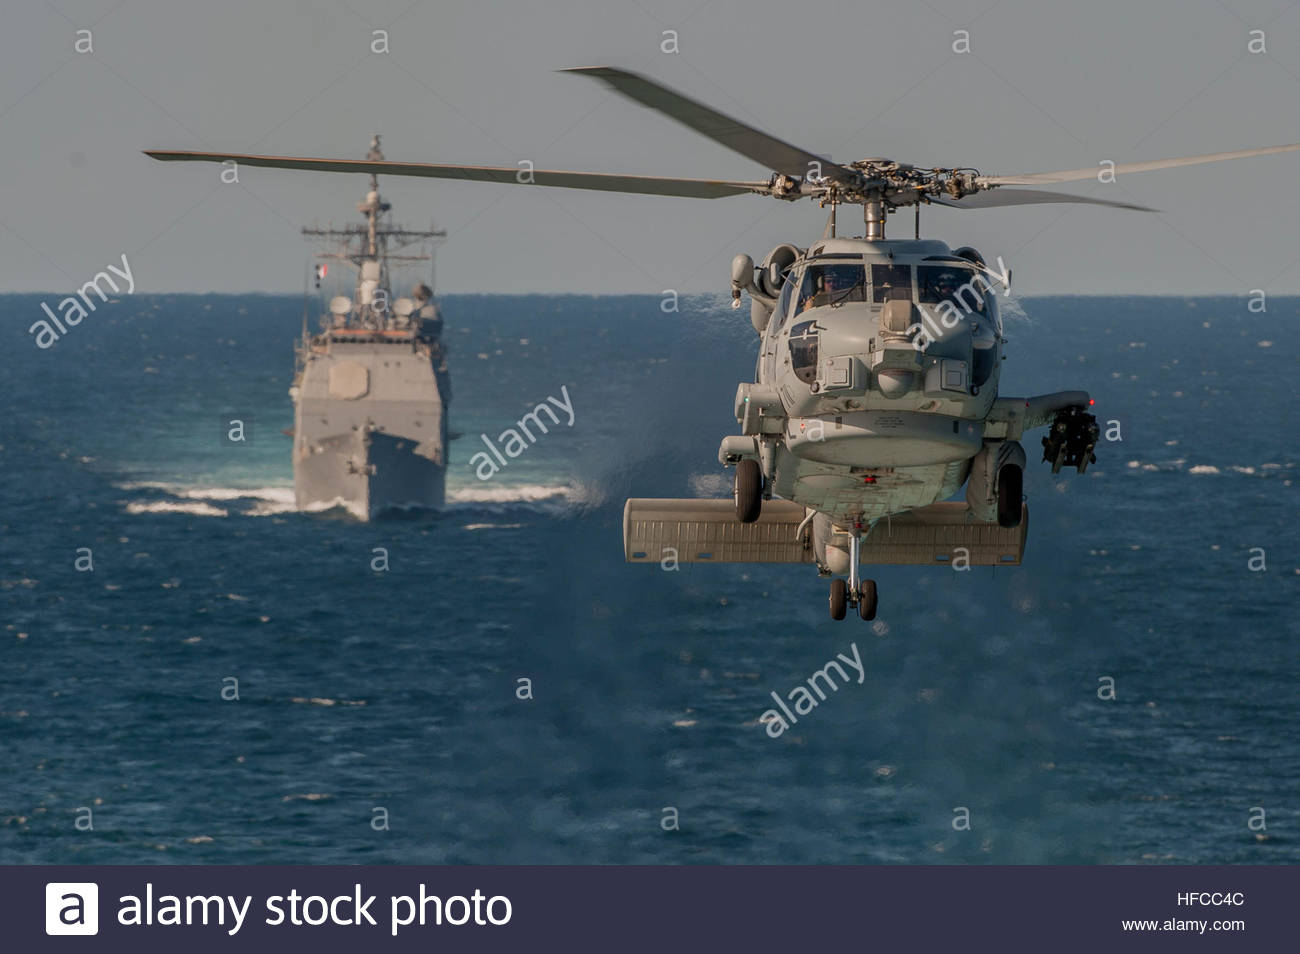 an-mh-60r-seahawk-helicopter-assigned-to-the-swamp-foxes-of-helicopter-HFCC4C.jpg